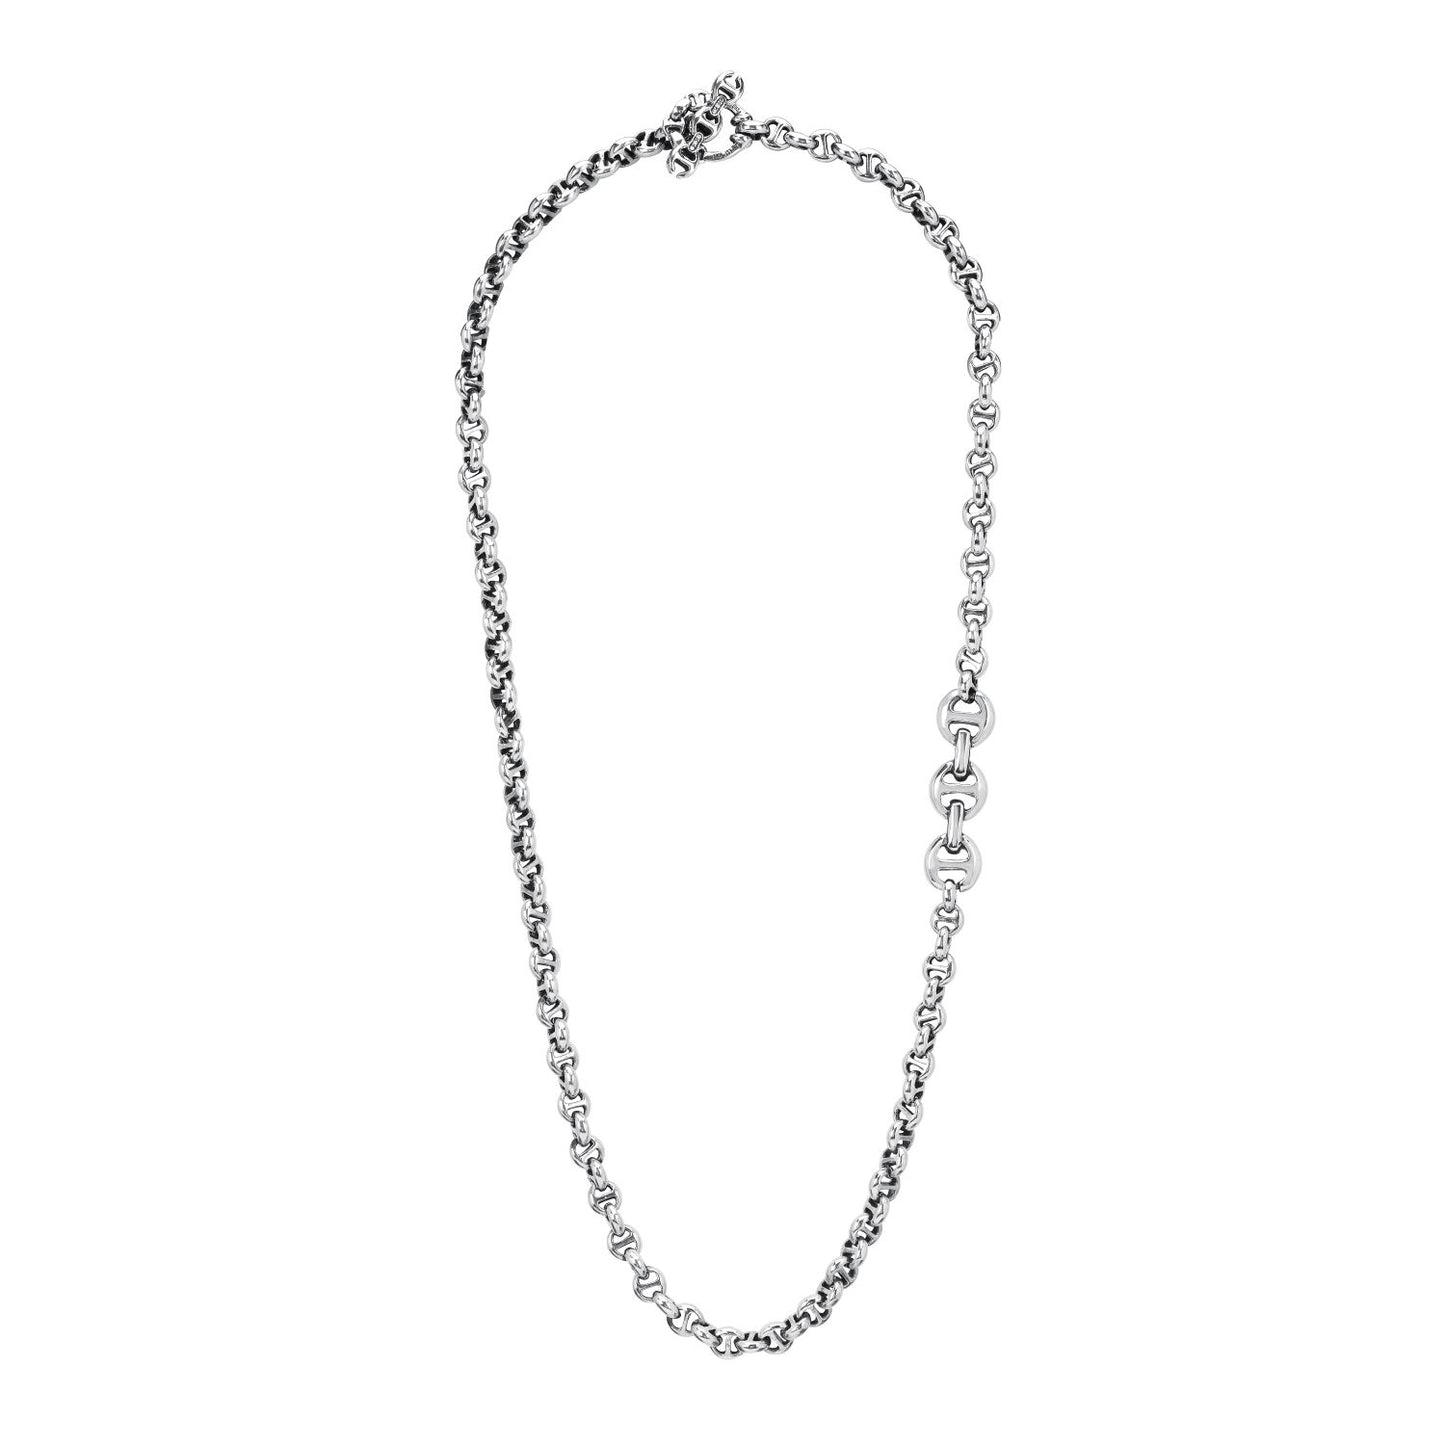 Hoorsenbuhs 5MM Open Link Necklace With Diamond Toggle